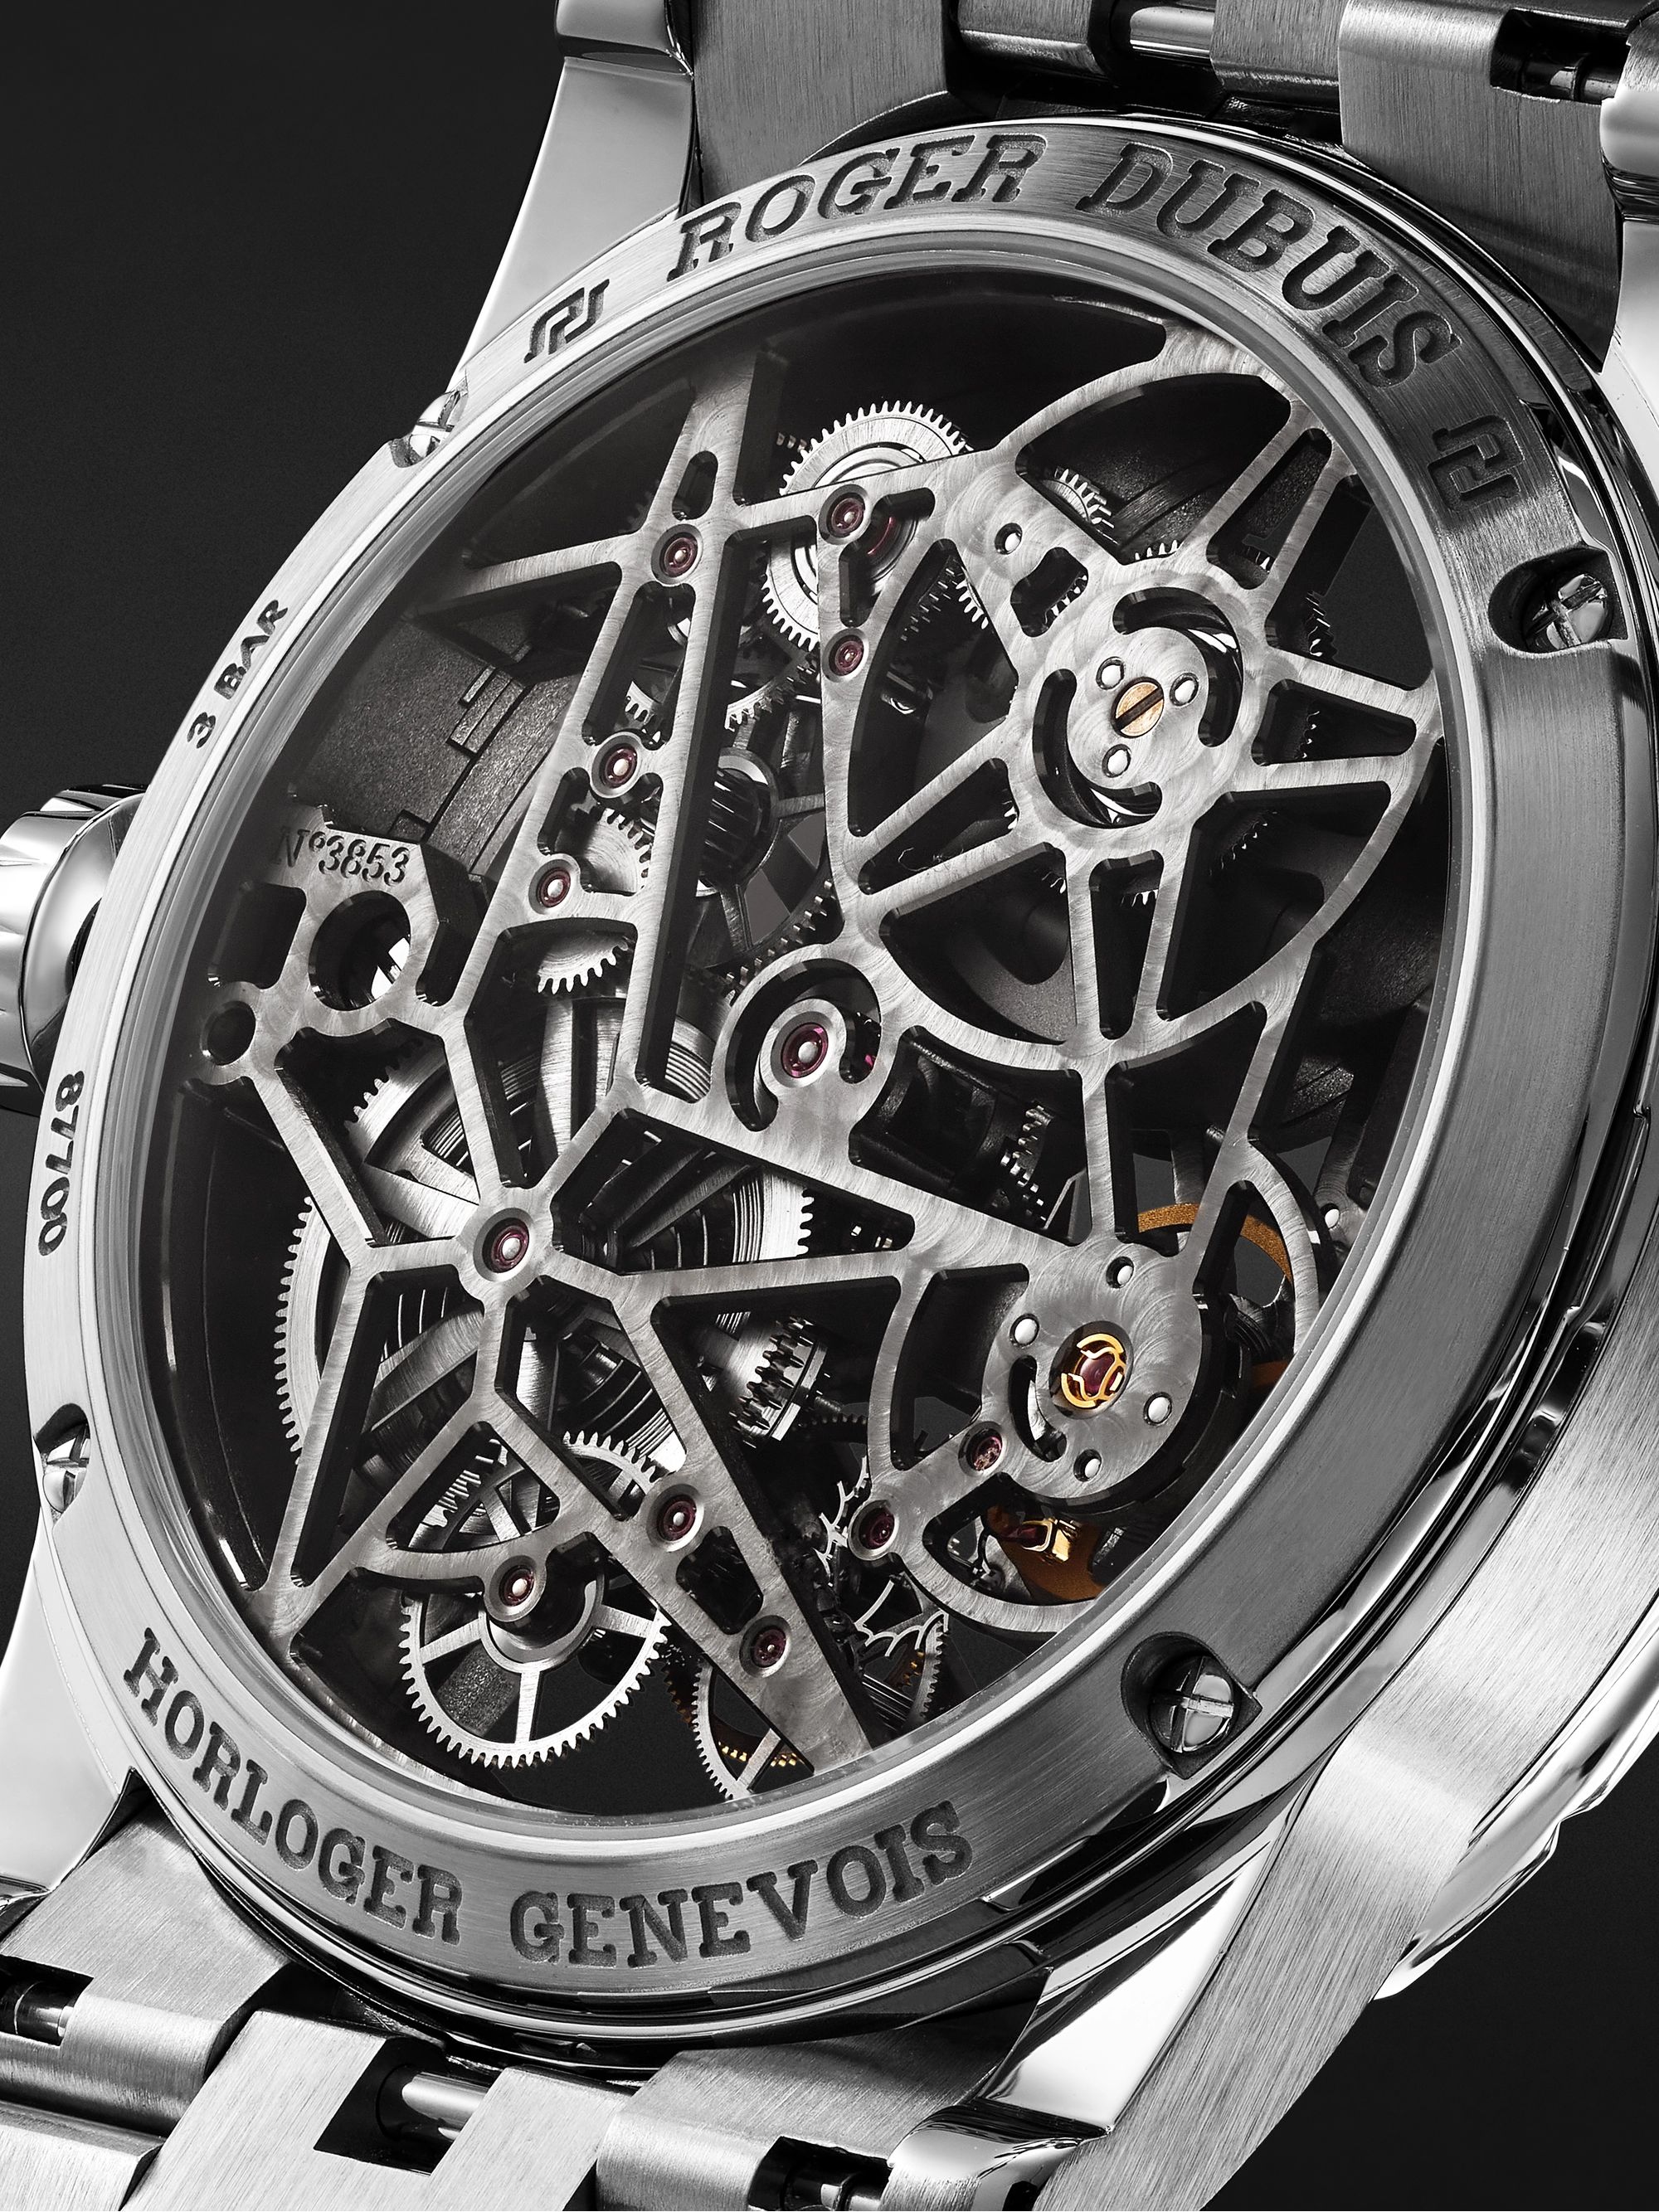 ROGER DUBUIS Excalibur Automatic Skeleton 42mm Stainless Steel Watch, Ref. No. EX0793